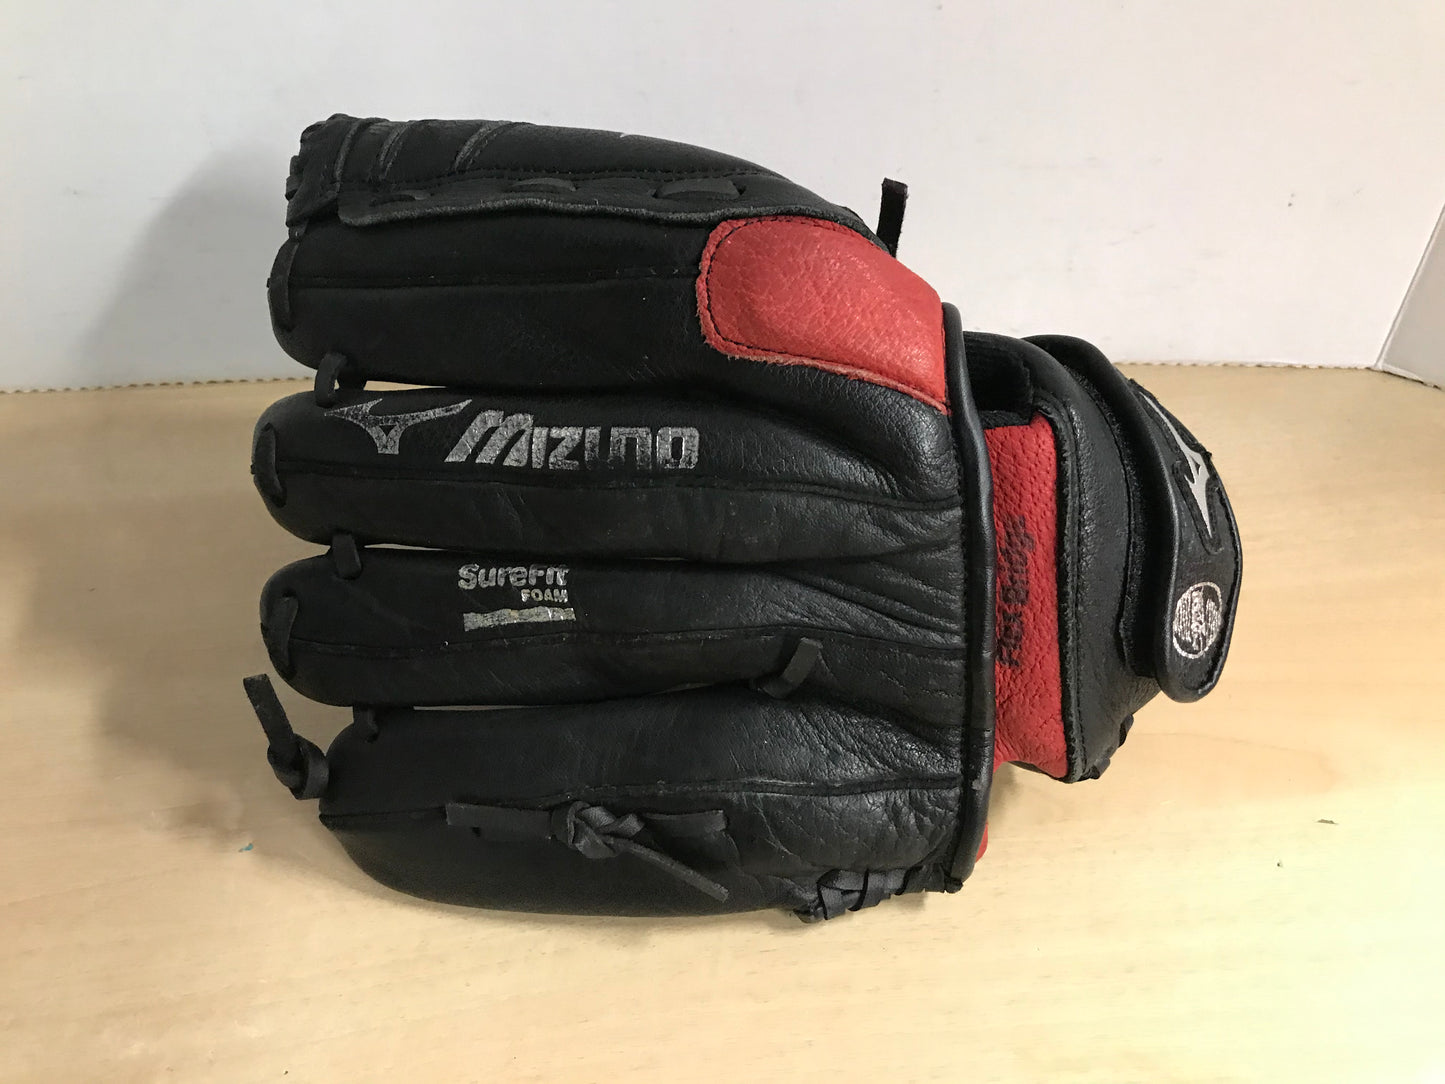 Baseball Glove Adult Size 11.5 inch Mizuno Max Flex Black Red Leather Fits on Left Hand Excellent